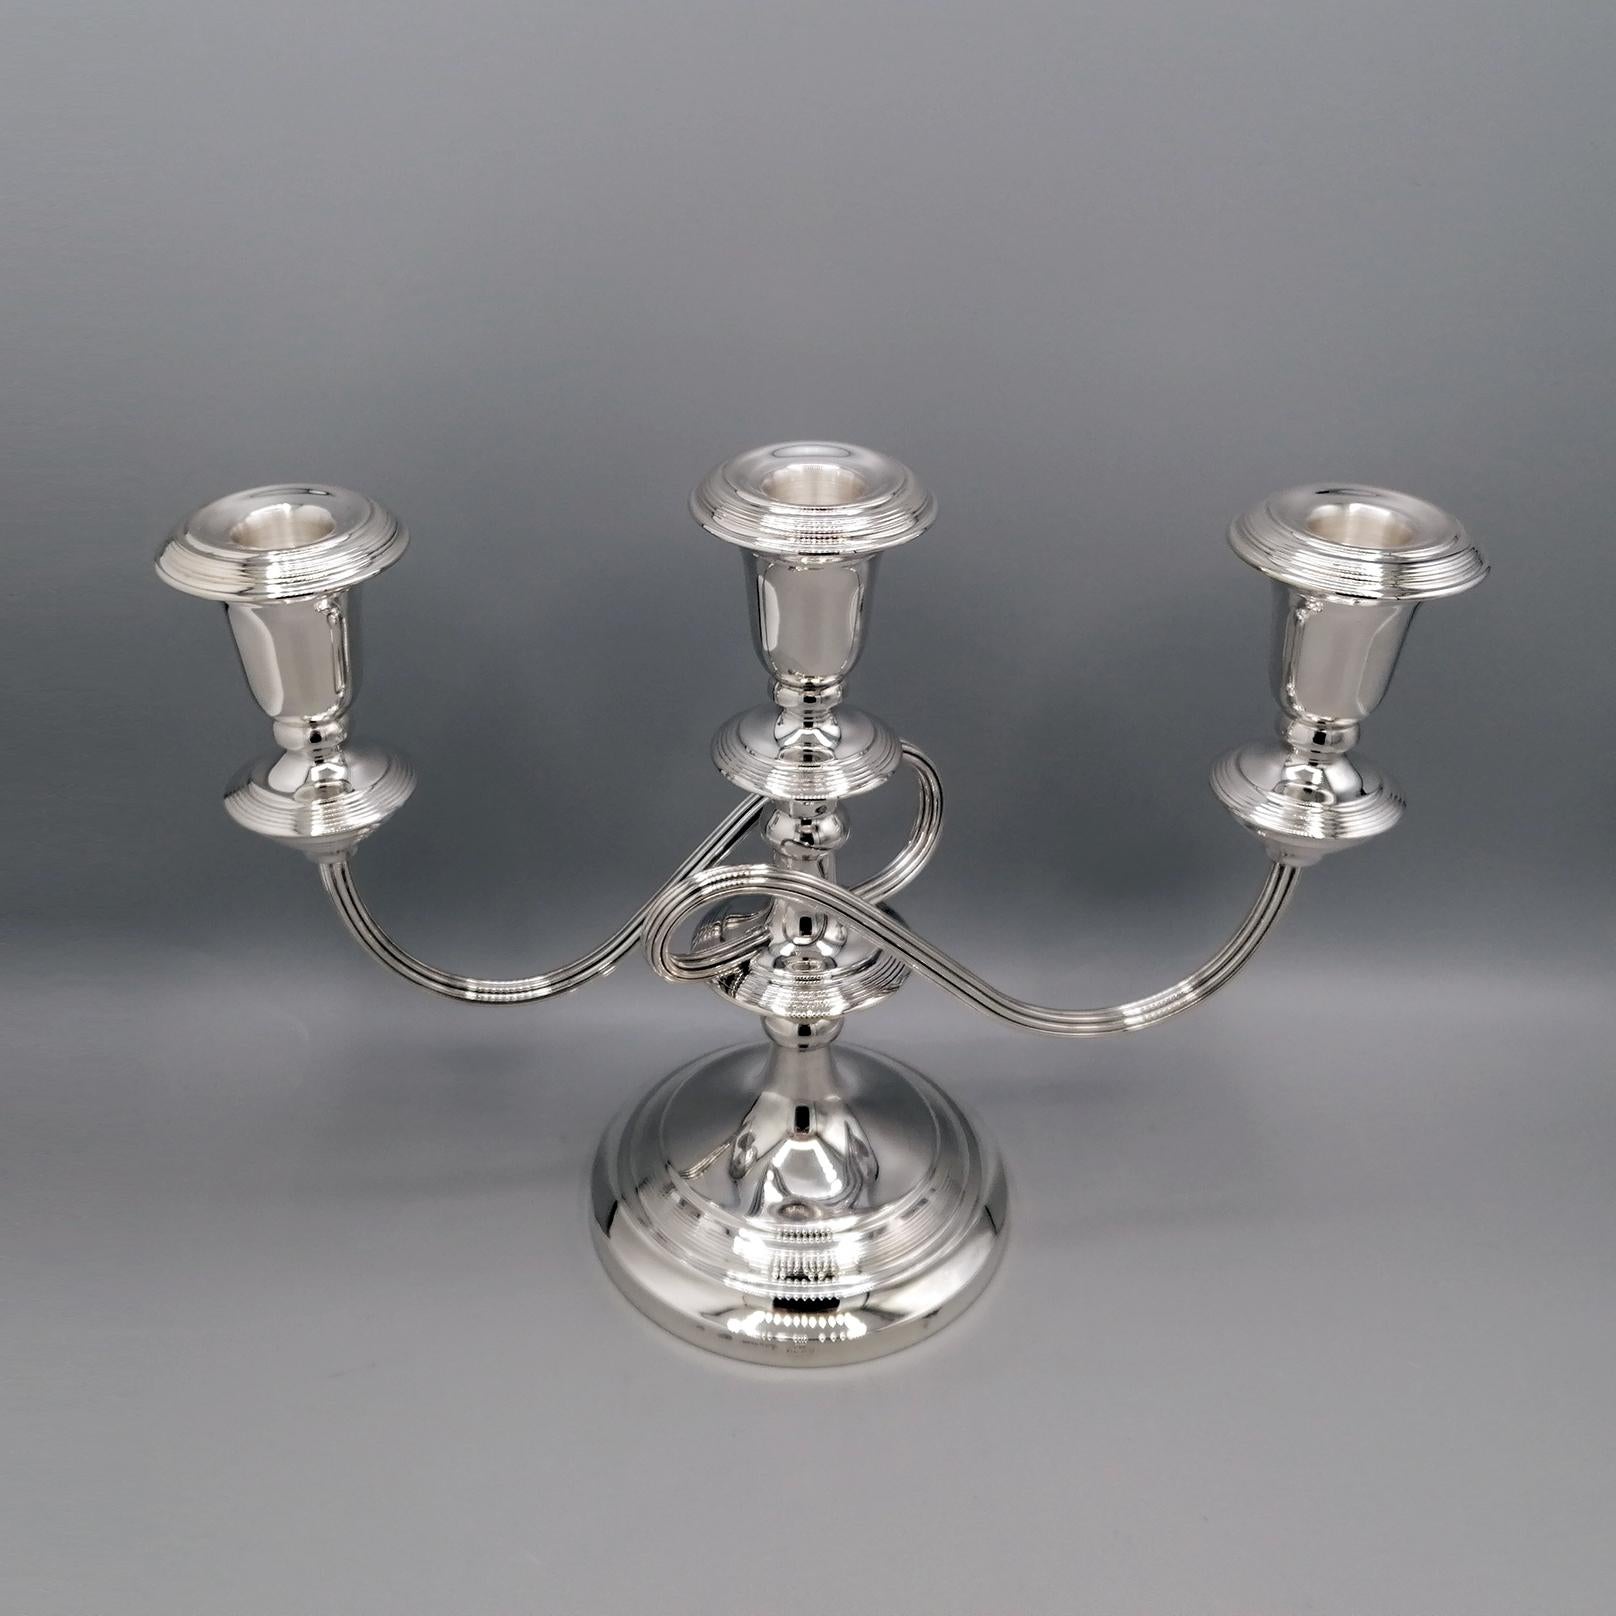 20th Century Italian solid Silver Pr. of Candelabras For Sale 4